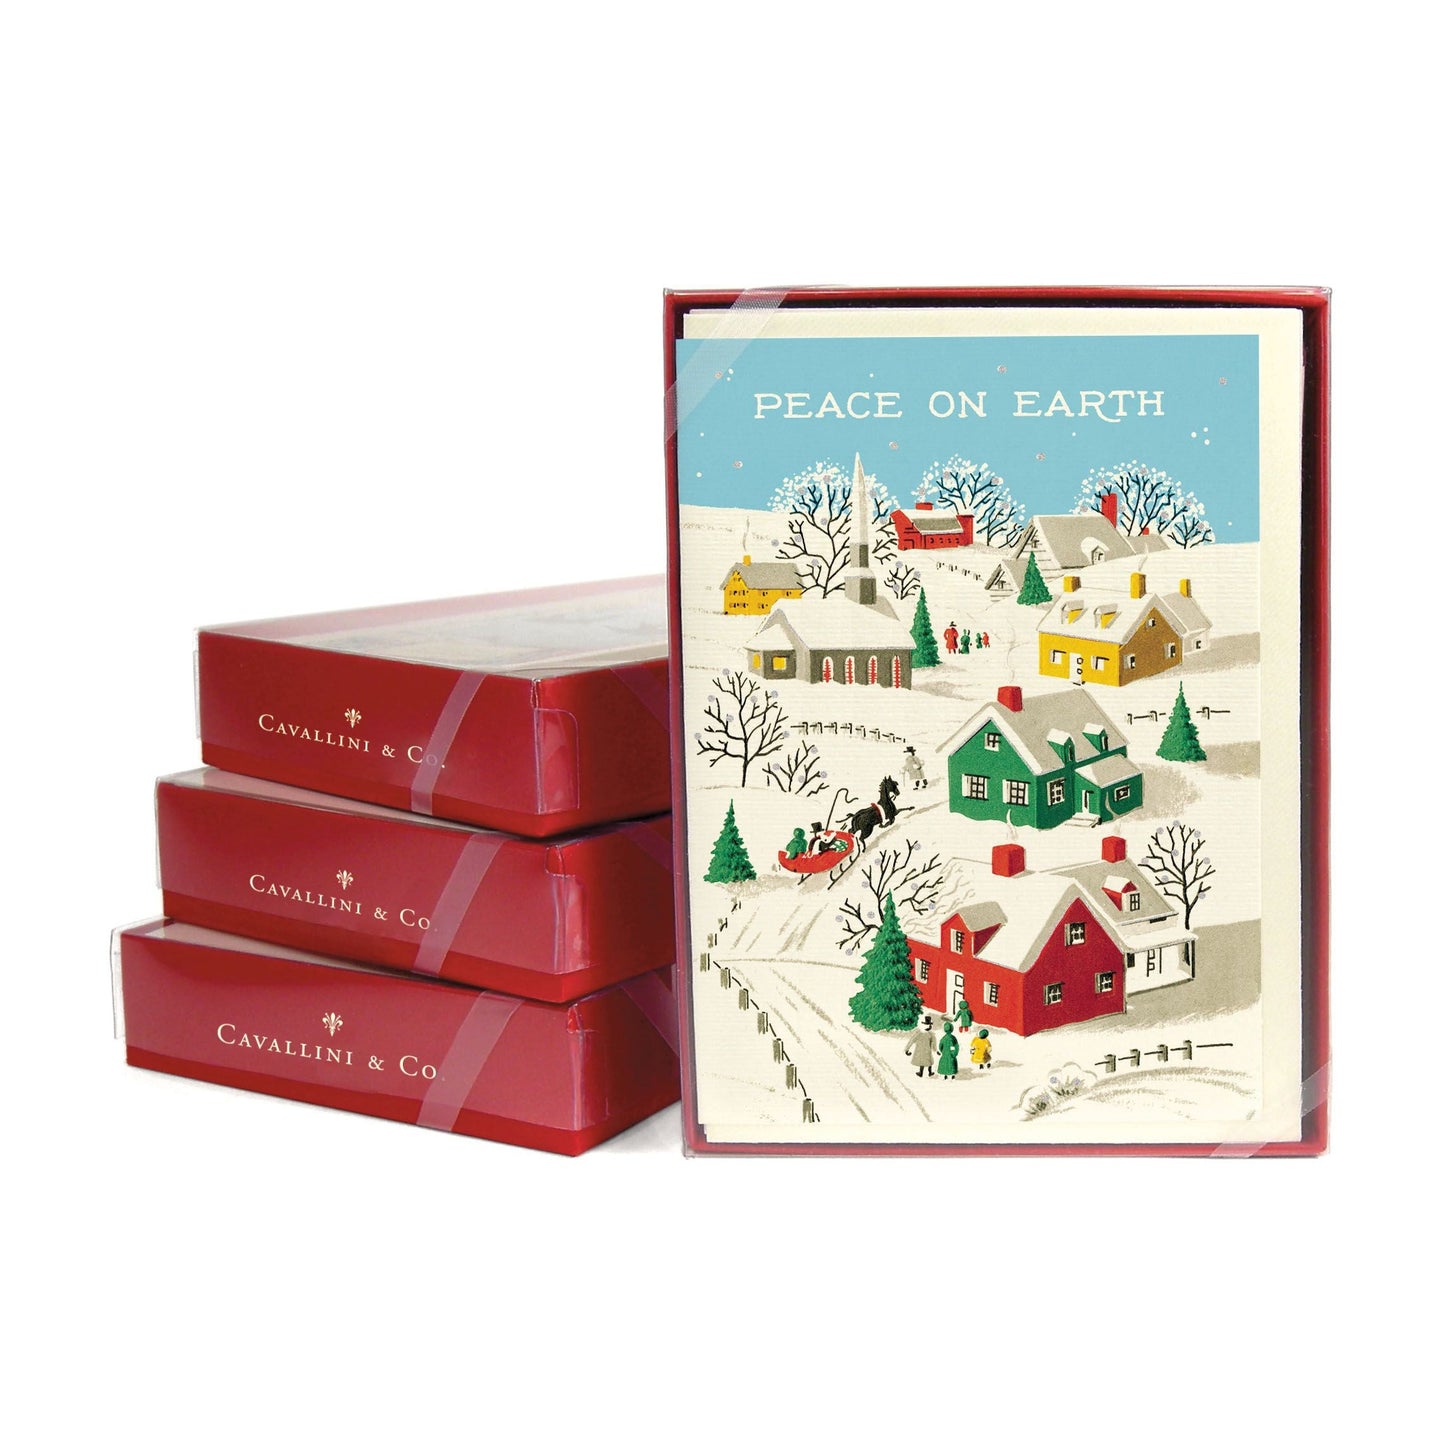 Cavallini & Co. Boxed Note Cards - Peace on Earth